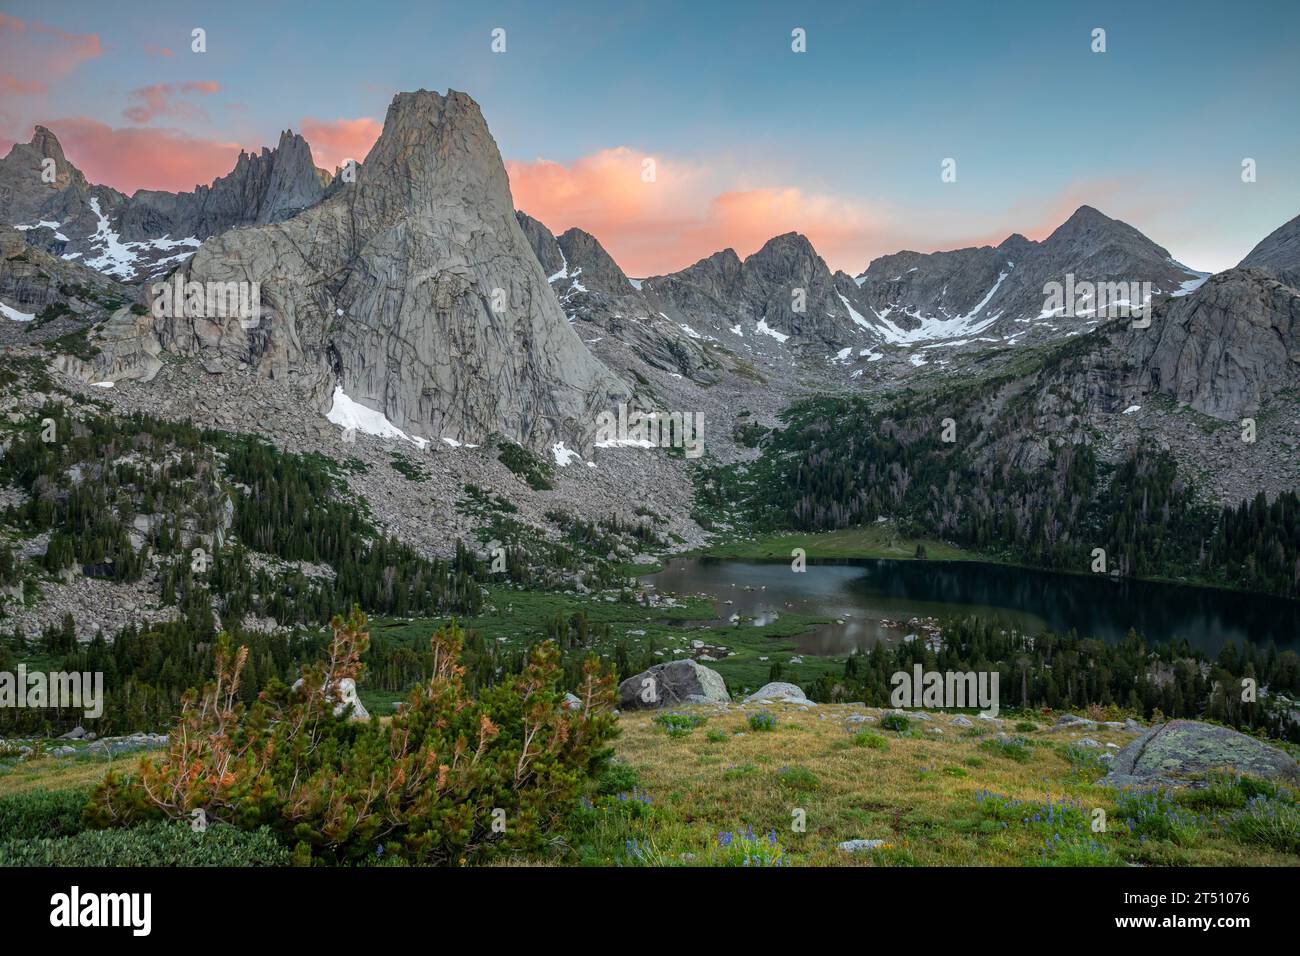 WY05581-00...WYOMING - Pingora Peak and Lonesome Lake from the Jackass Pass Trail at sunrise in the Cirque of the Towers, Popo Agie Wilderness. Stock Photo